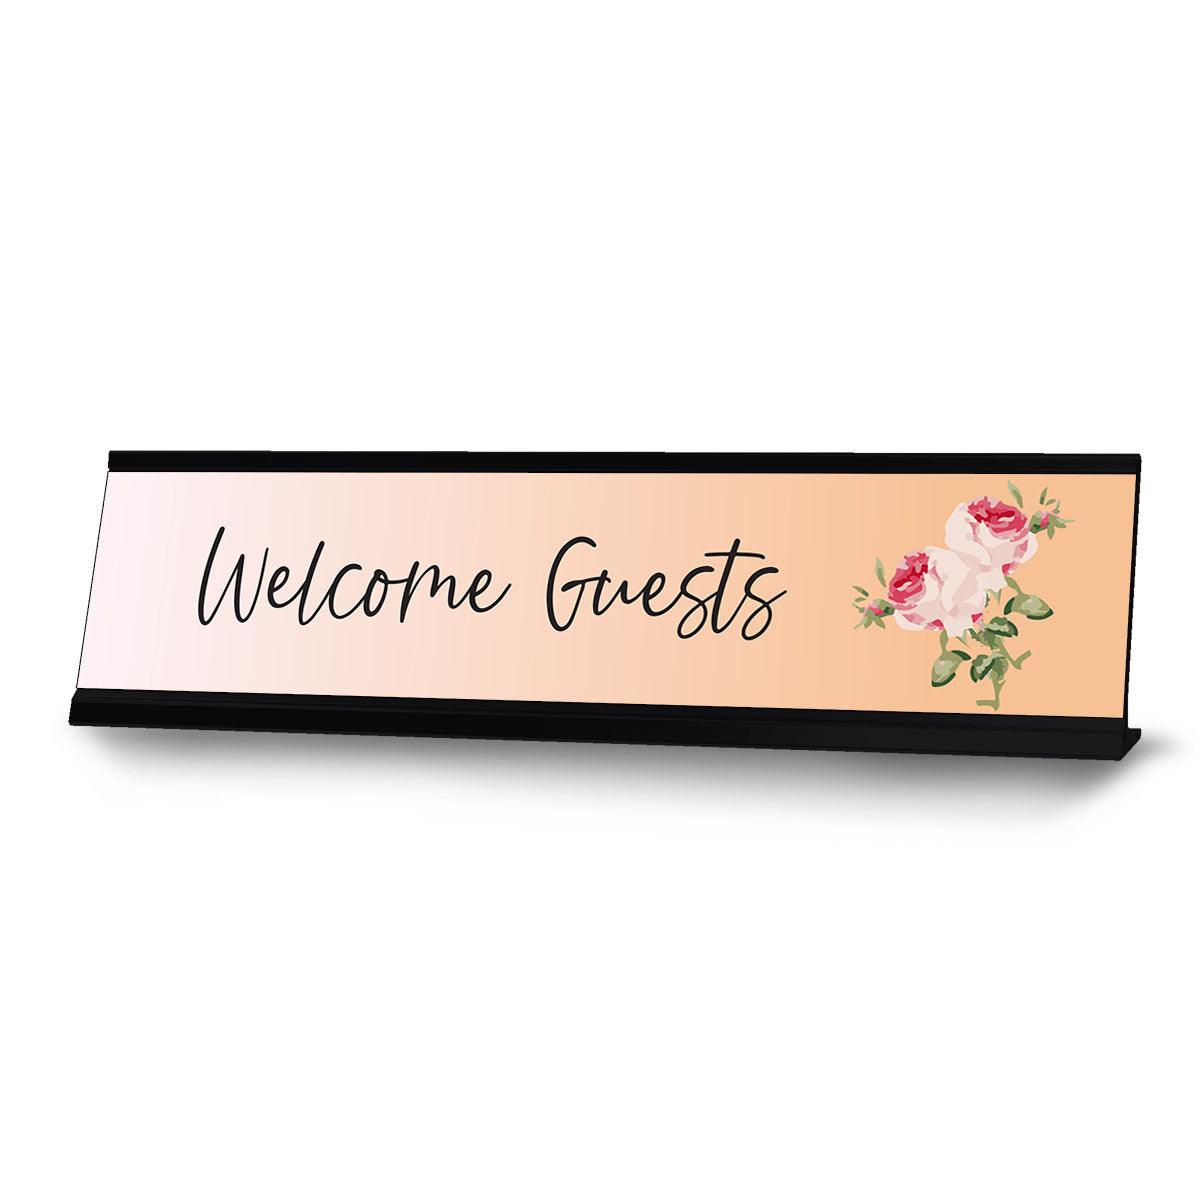 Welcome Guests, Desk Sign or Front Desk Counter Sign (2 x 8")